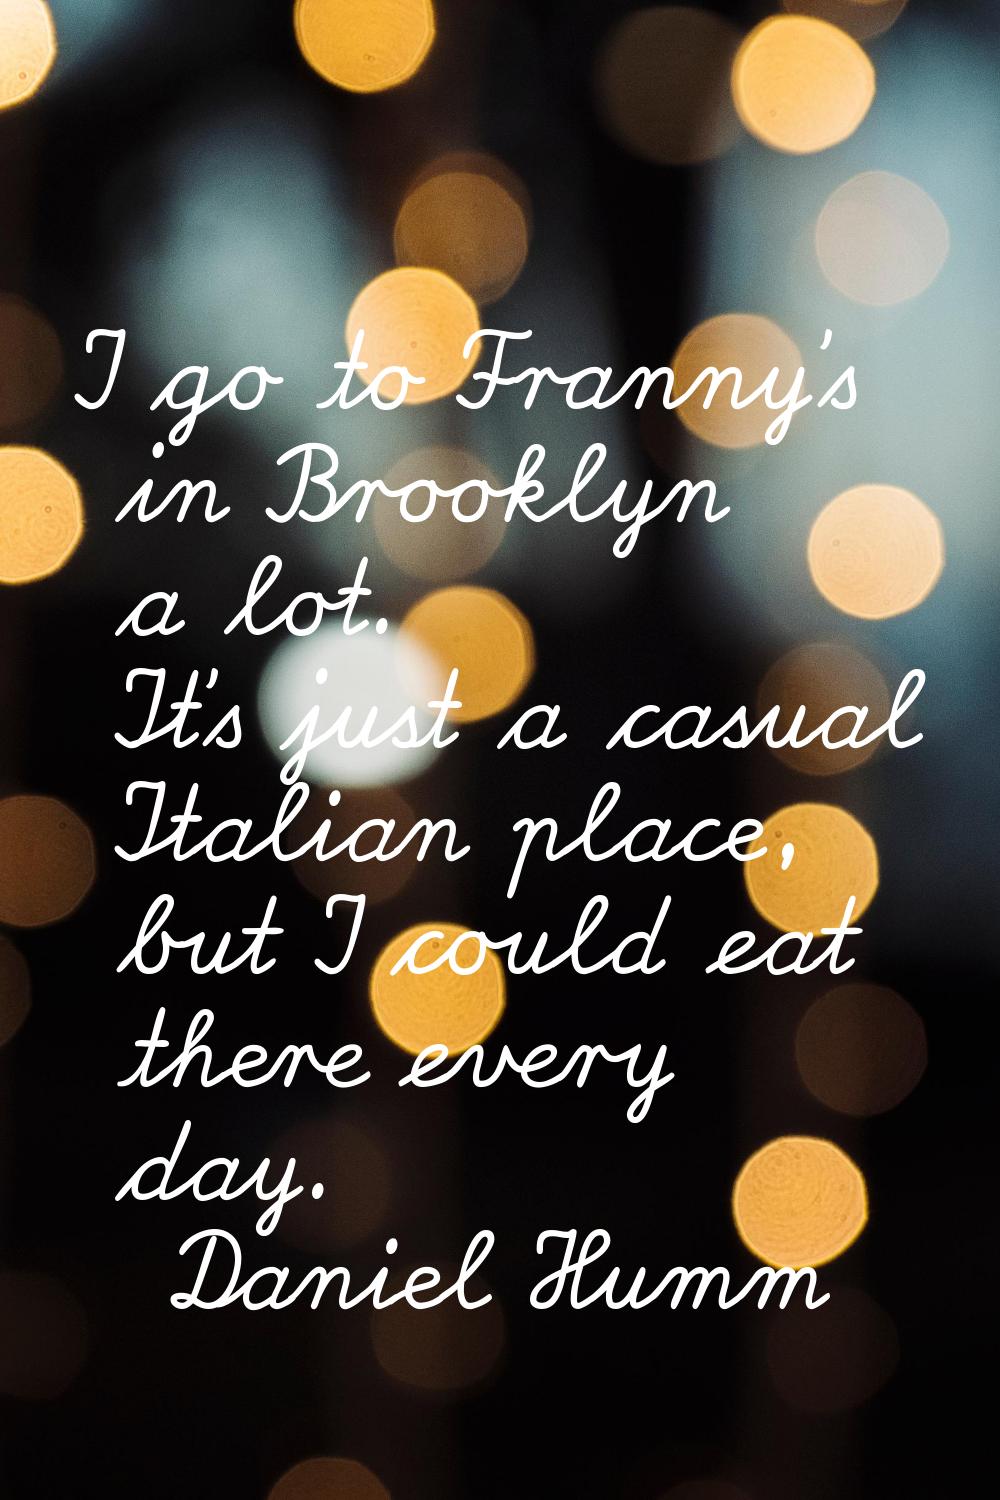 I go to Franny's in Brooklyn a lot. It's just a casual Italian place, but I could eat there every d